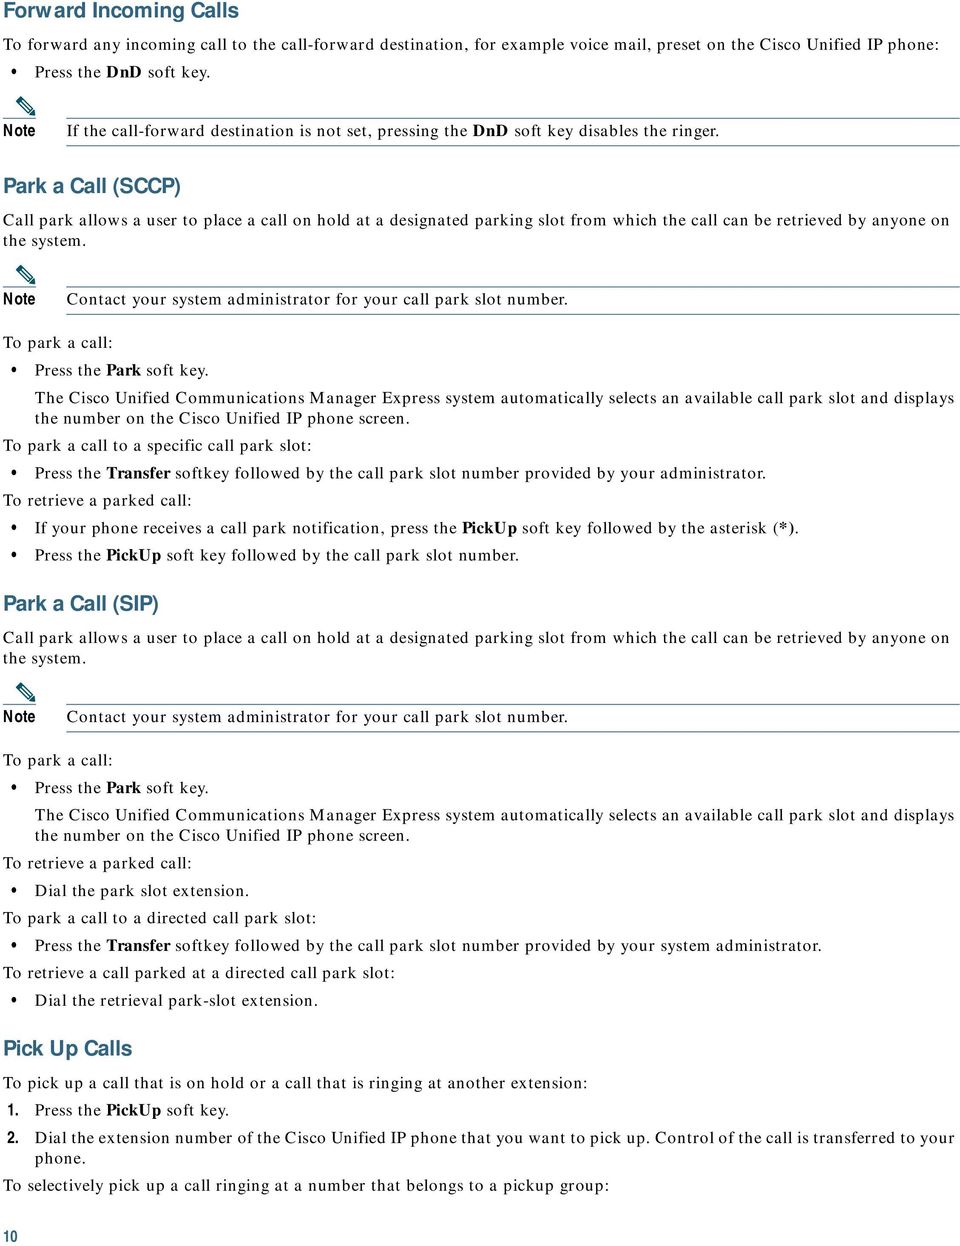 Park a Call (SCCP) Call park allows a user to place a call on hold at a designated parking slot from which the call can be retrieved by anyone on the system.